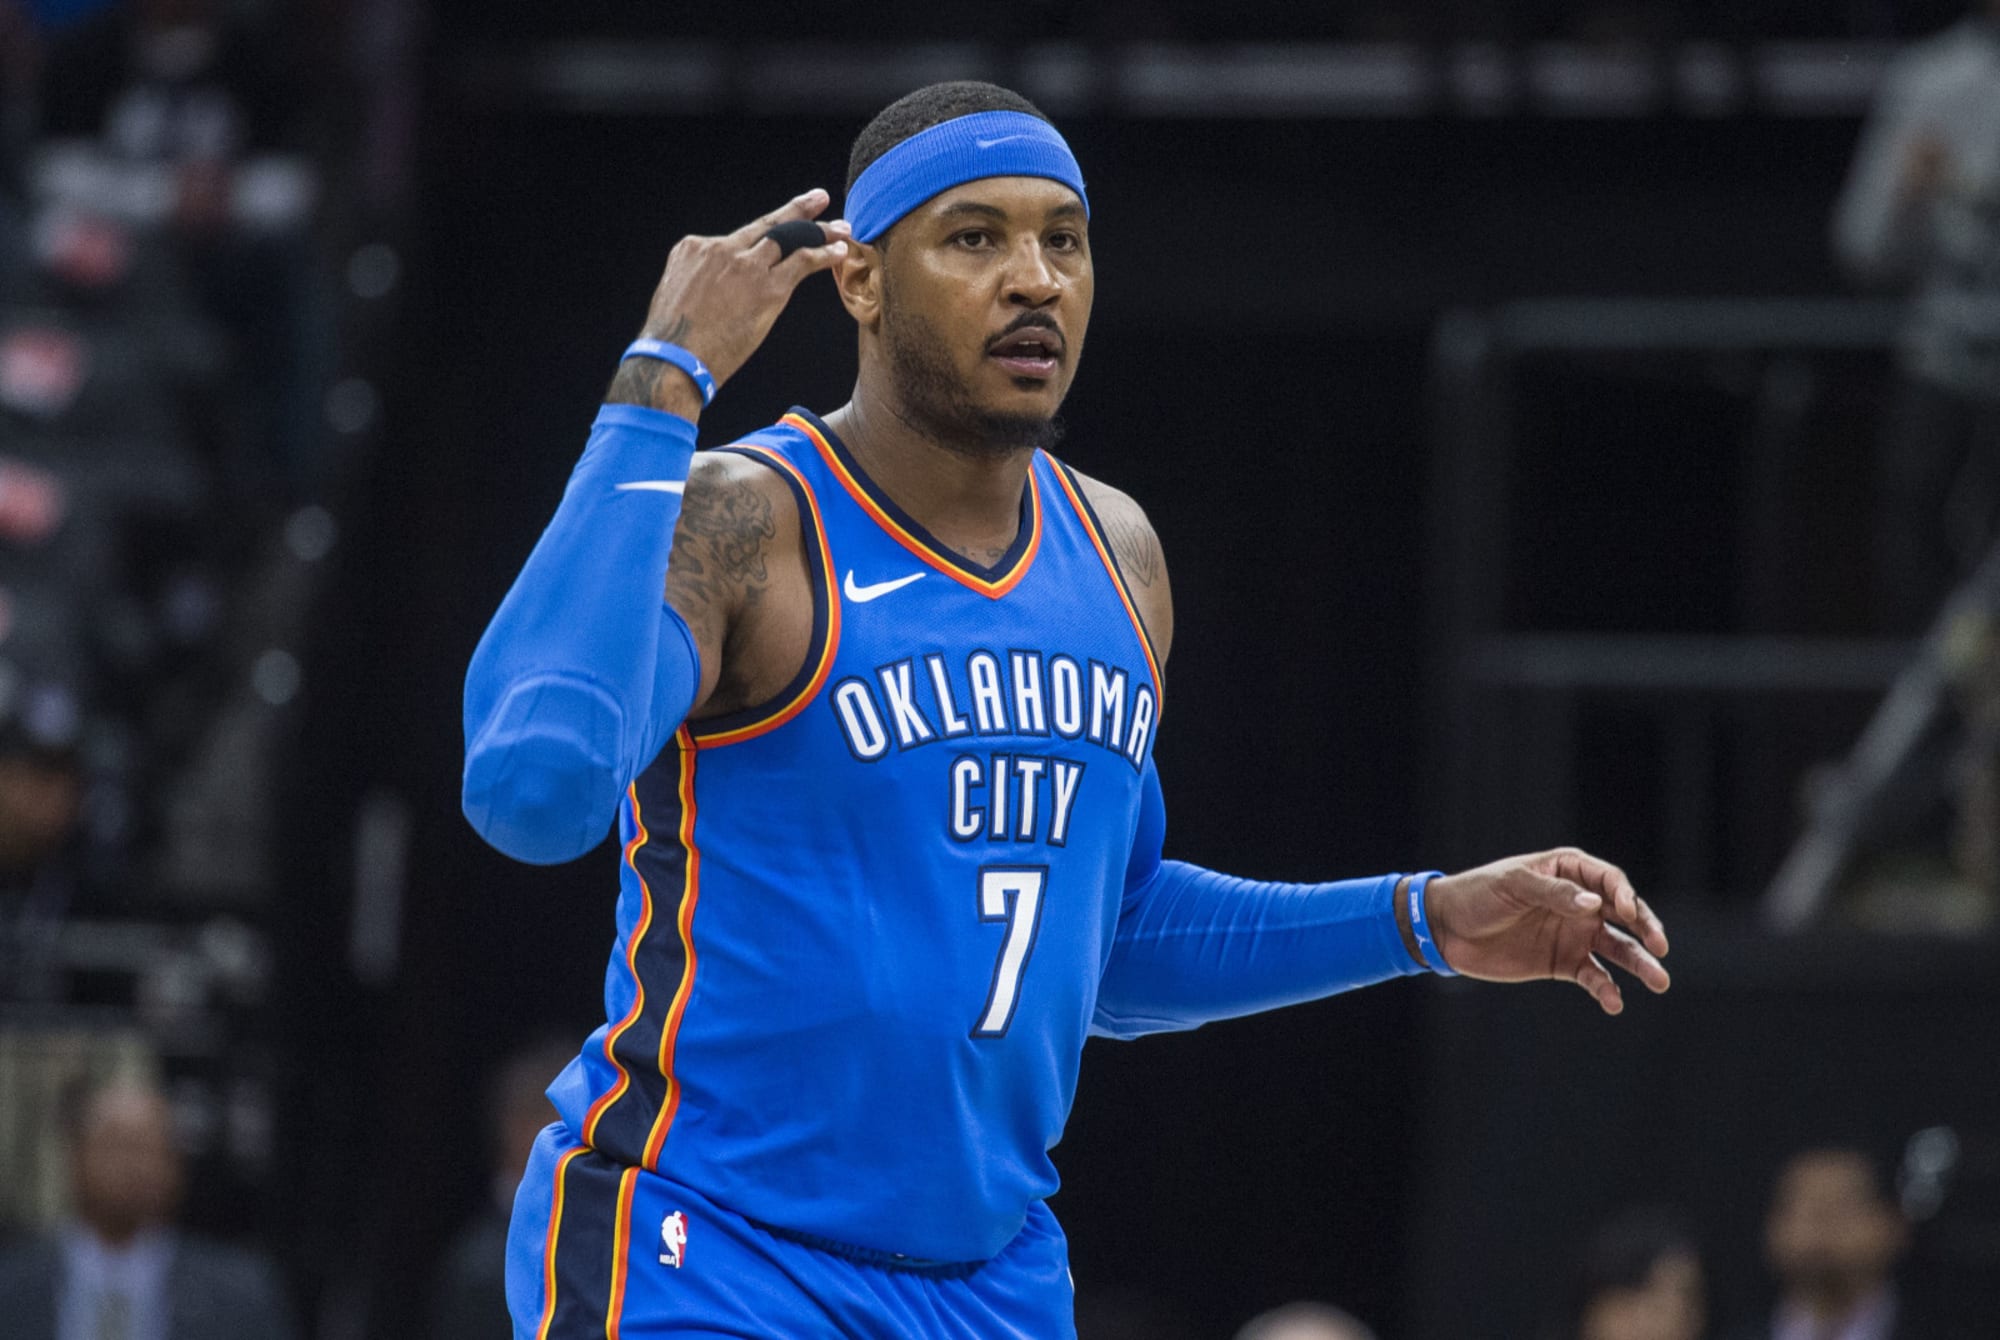 Carmelo Anthony to sign with Houston Rockets after clearing waivers